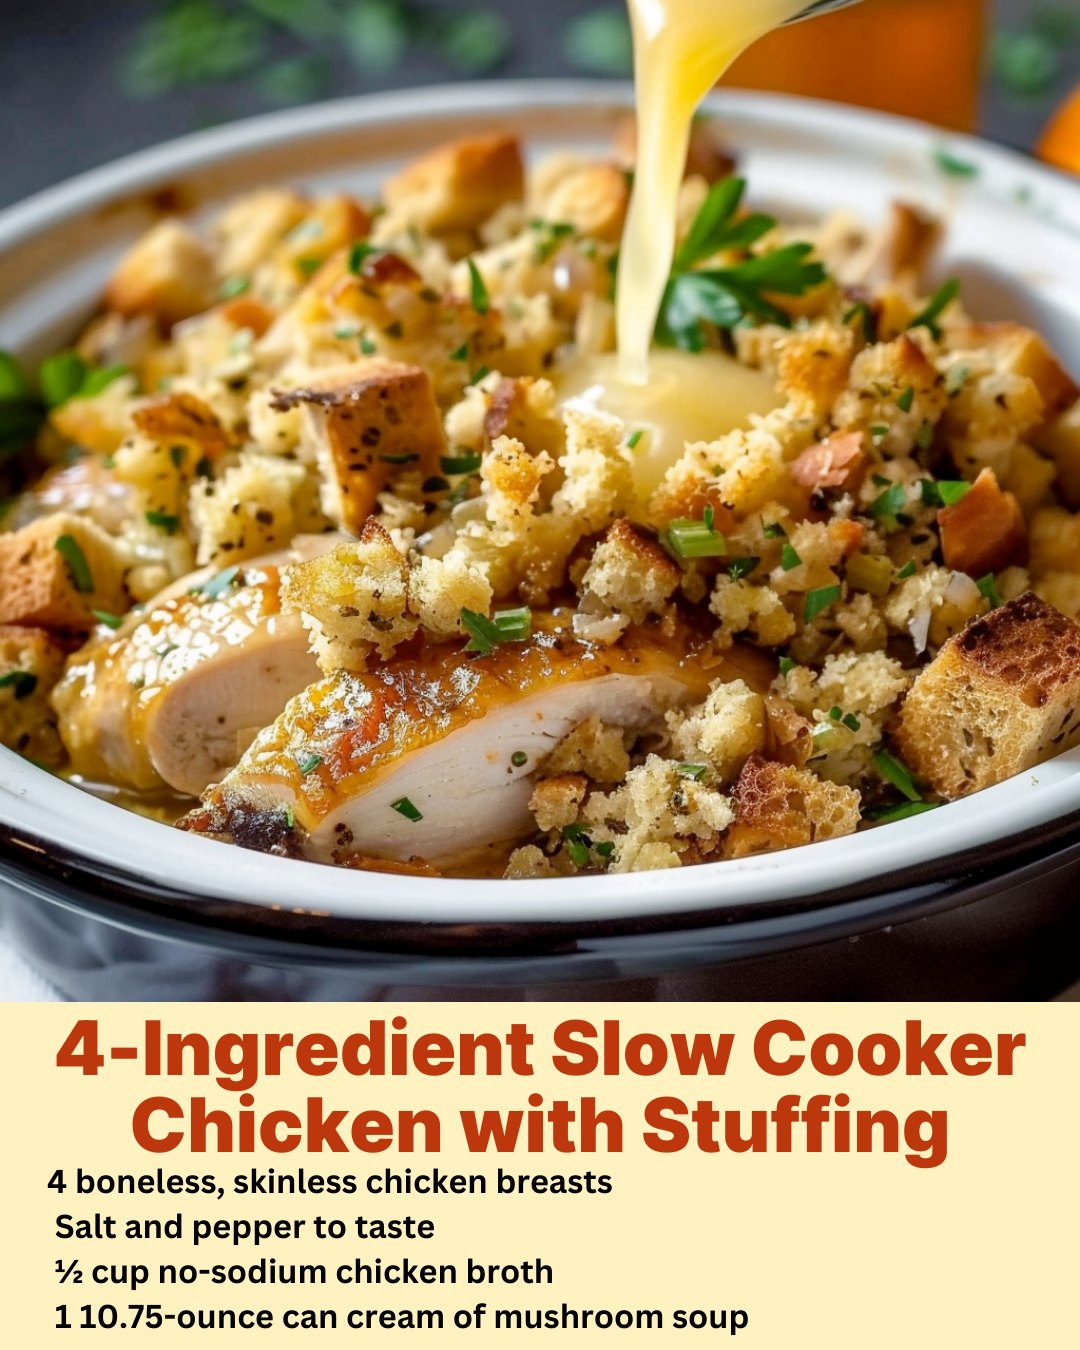 Slow Cooker Chicken with Stuffing